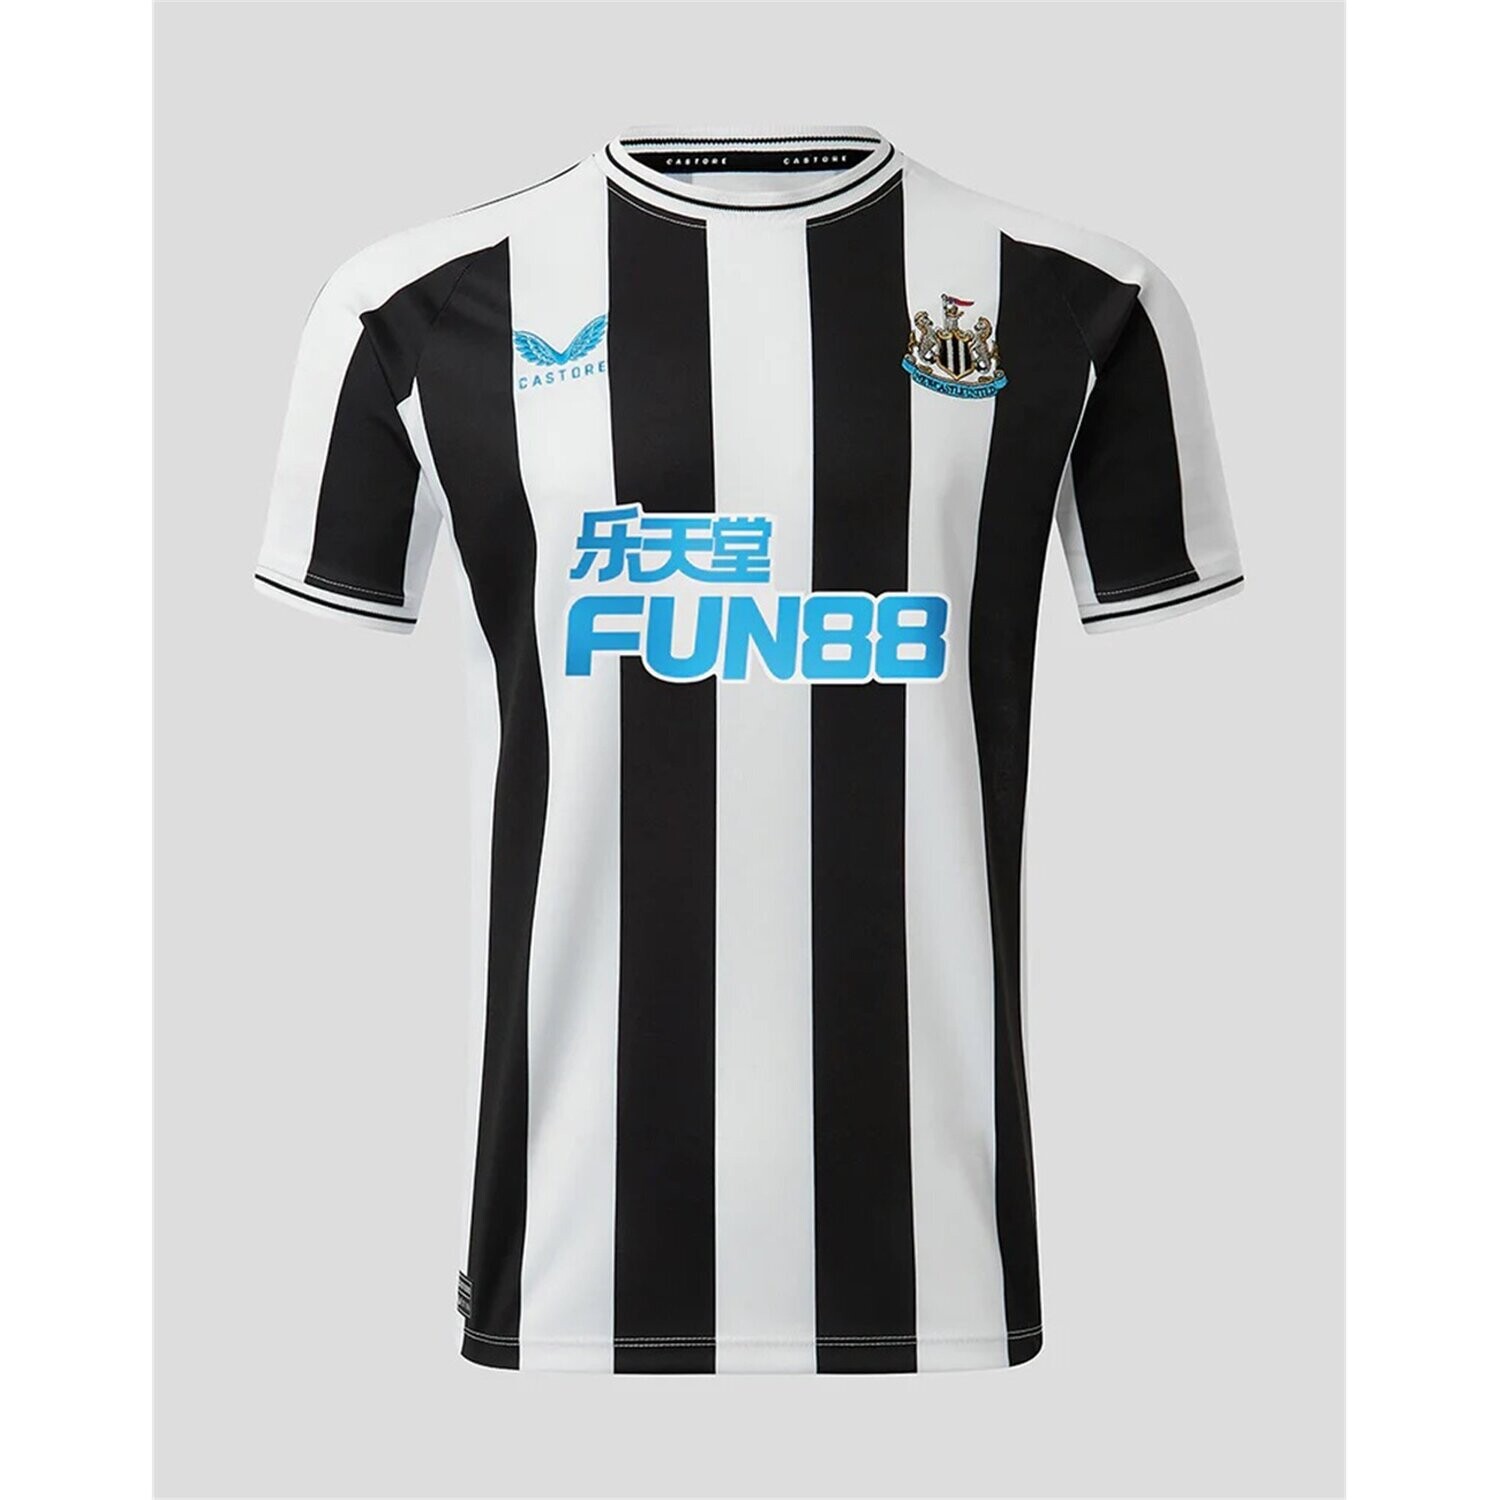 Newcastle United Home Soccer Jersey
22-23